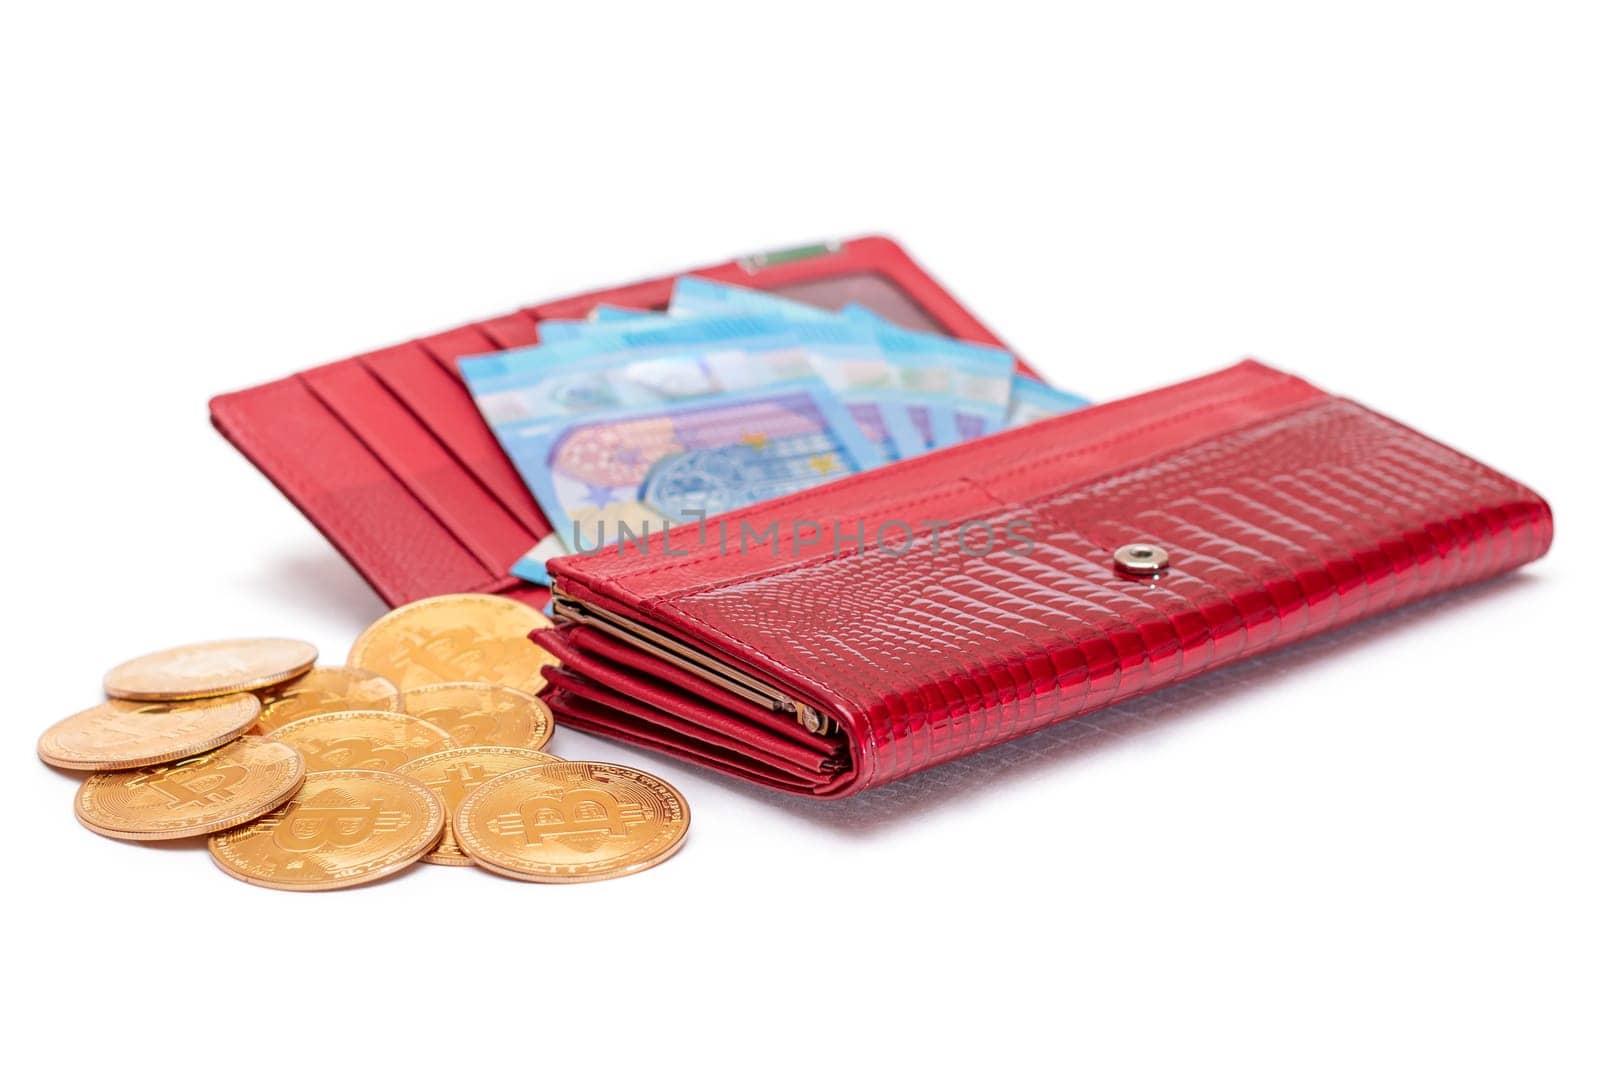 Opened Red Women Purse with 20 Euro Banknotes Inside and Bitcoin Coins - Isolation by InfinitumProdux